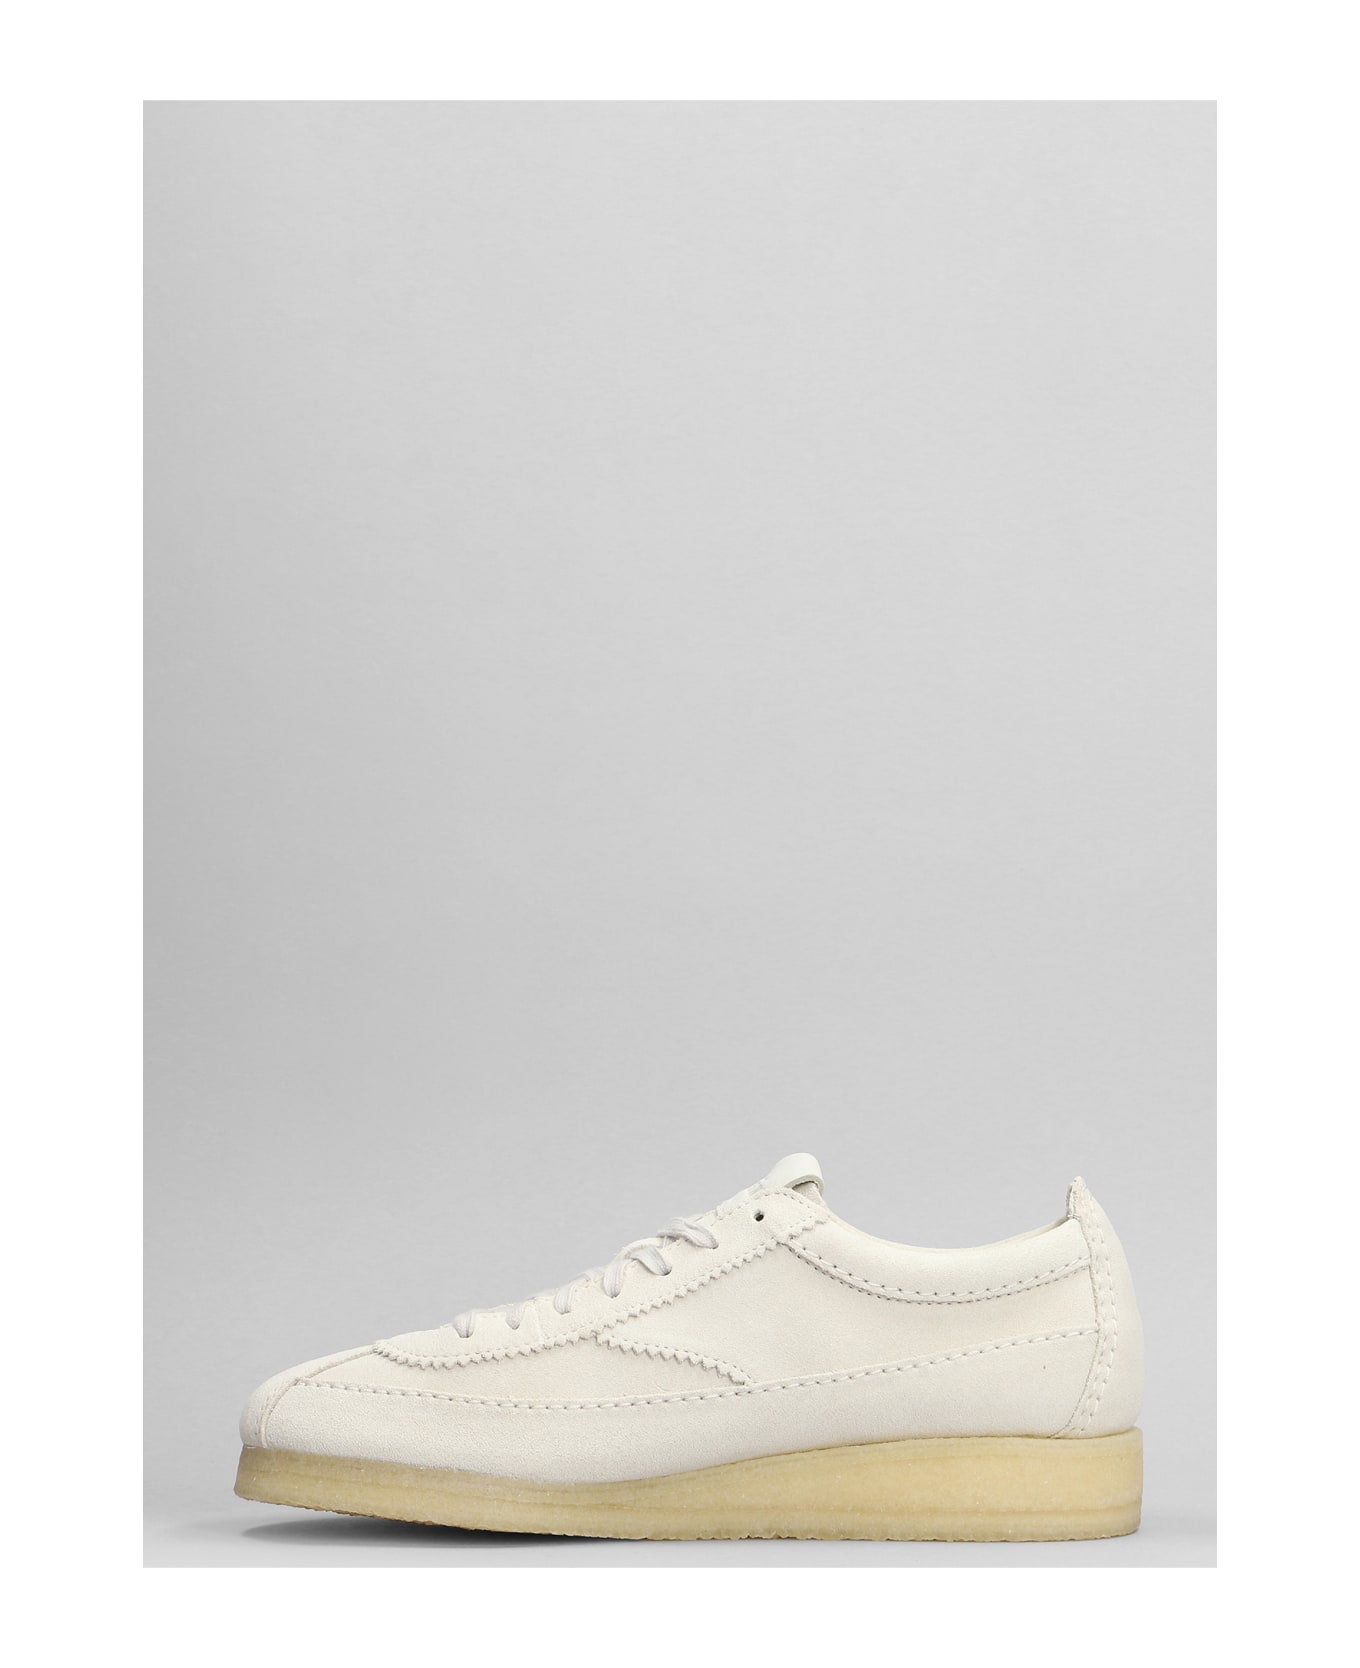 Clarks Wallabee Tor Sneakers In White Suede - white スニーカー